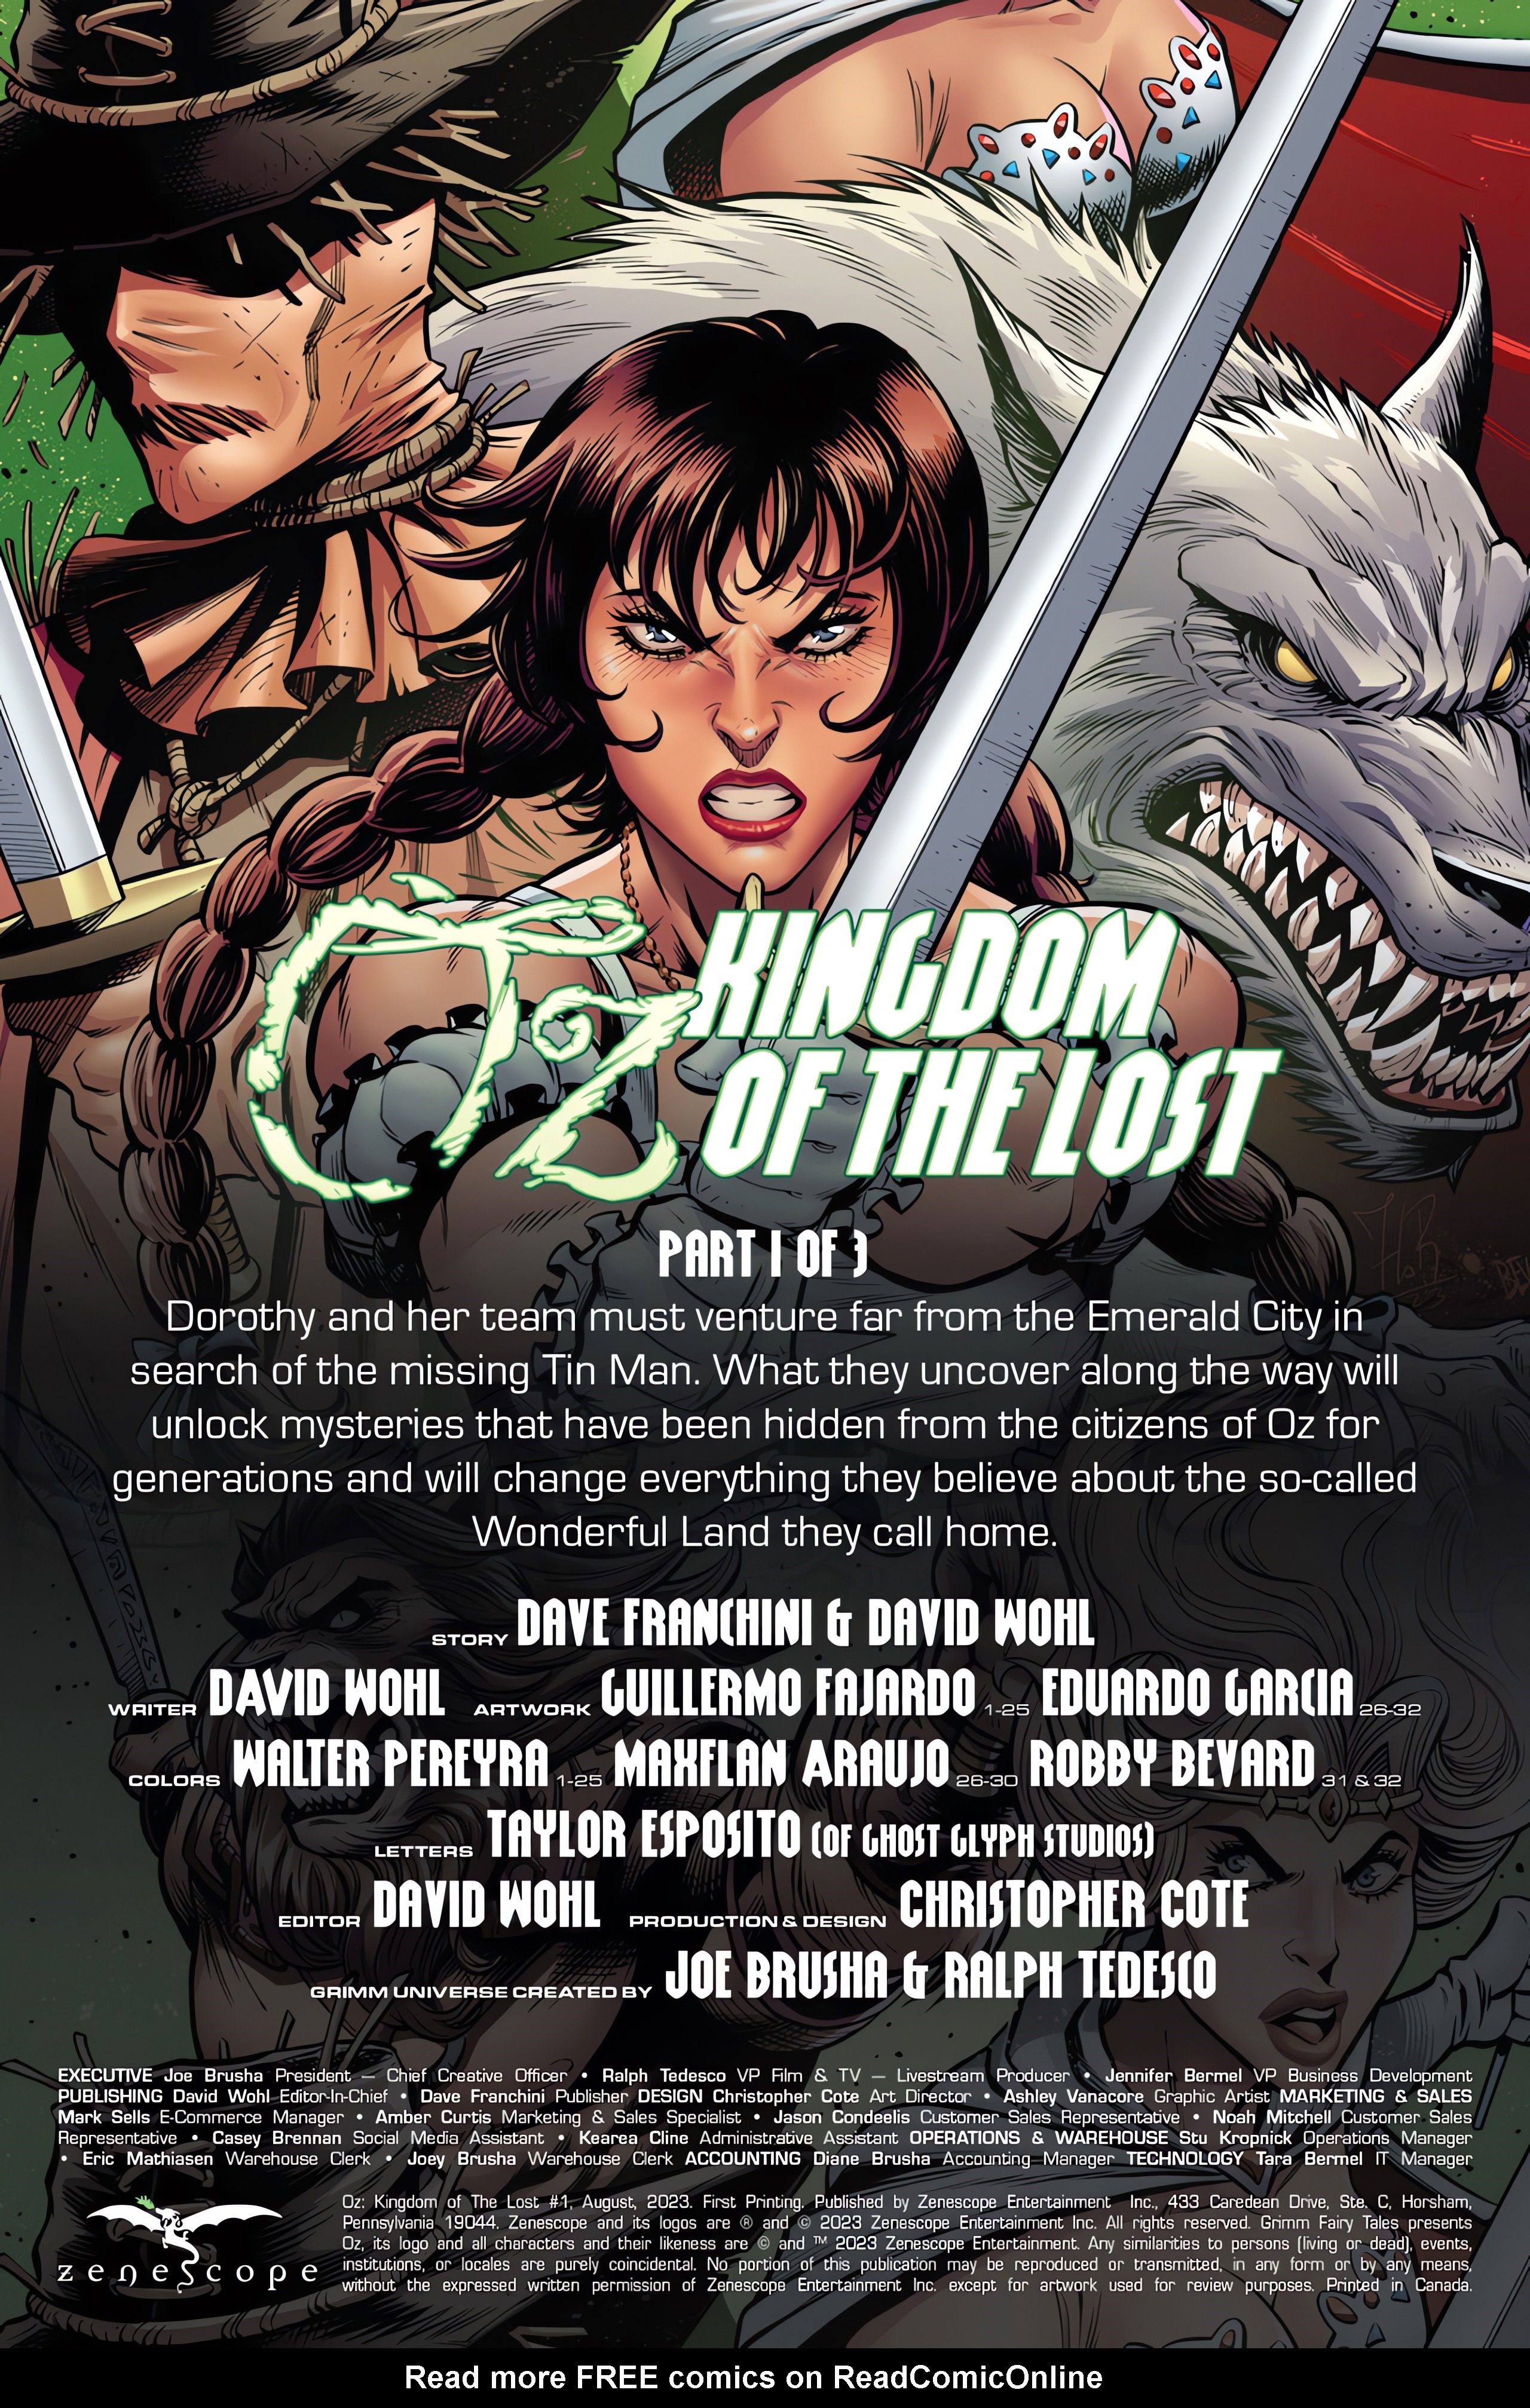 Read online Oz: Kingdom of the Lost comic -  Issue #1 - 2